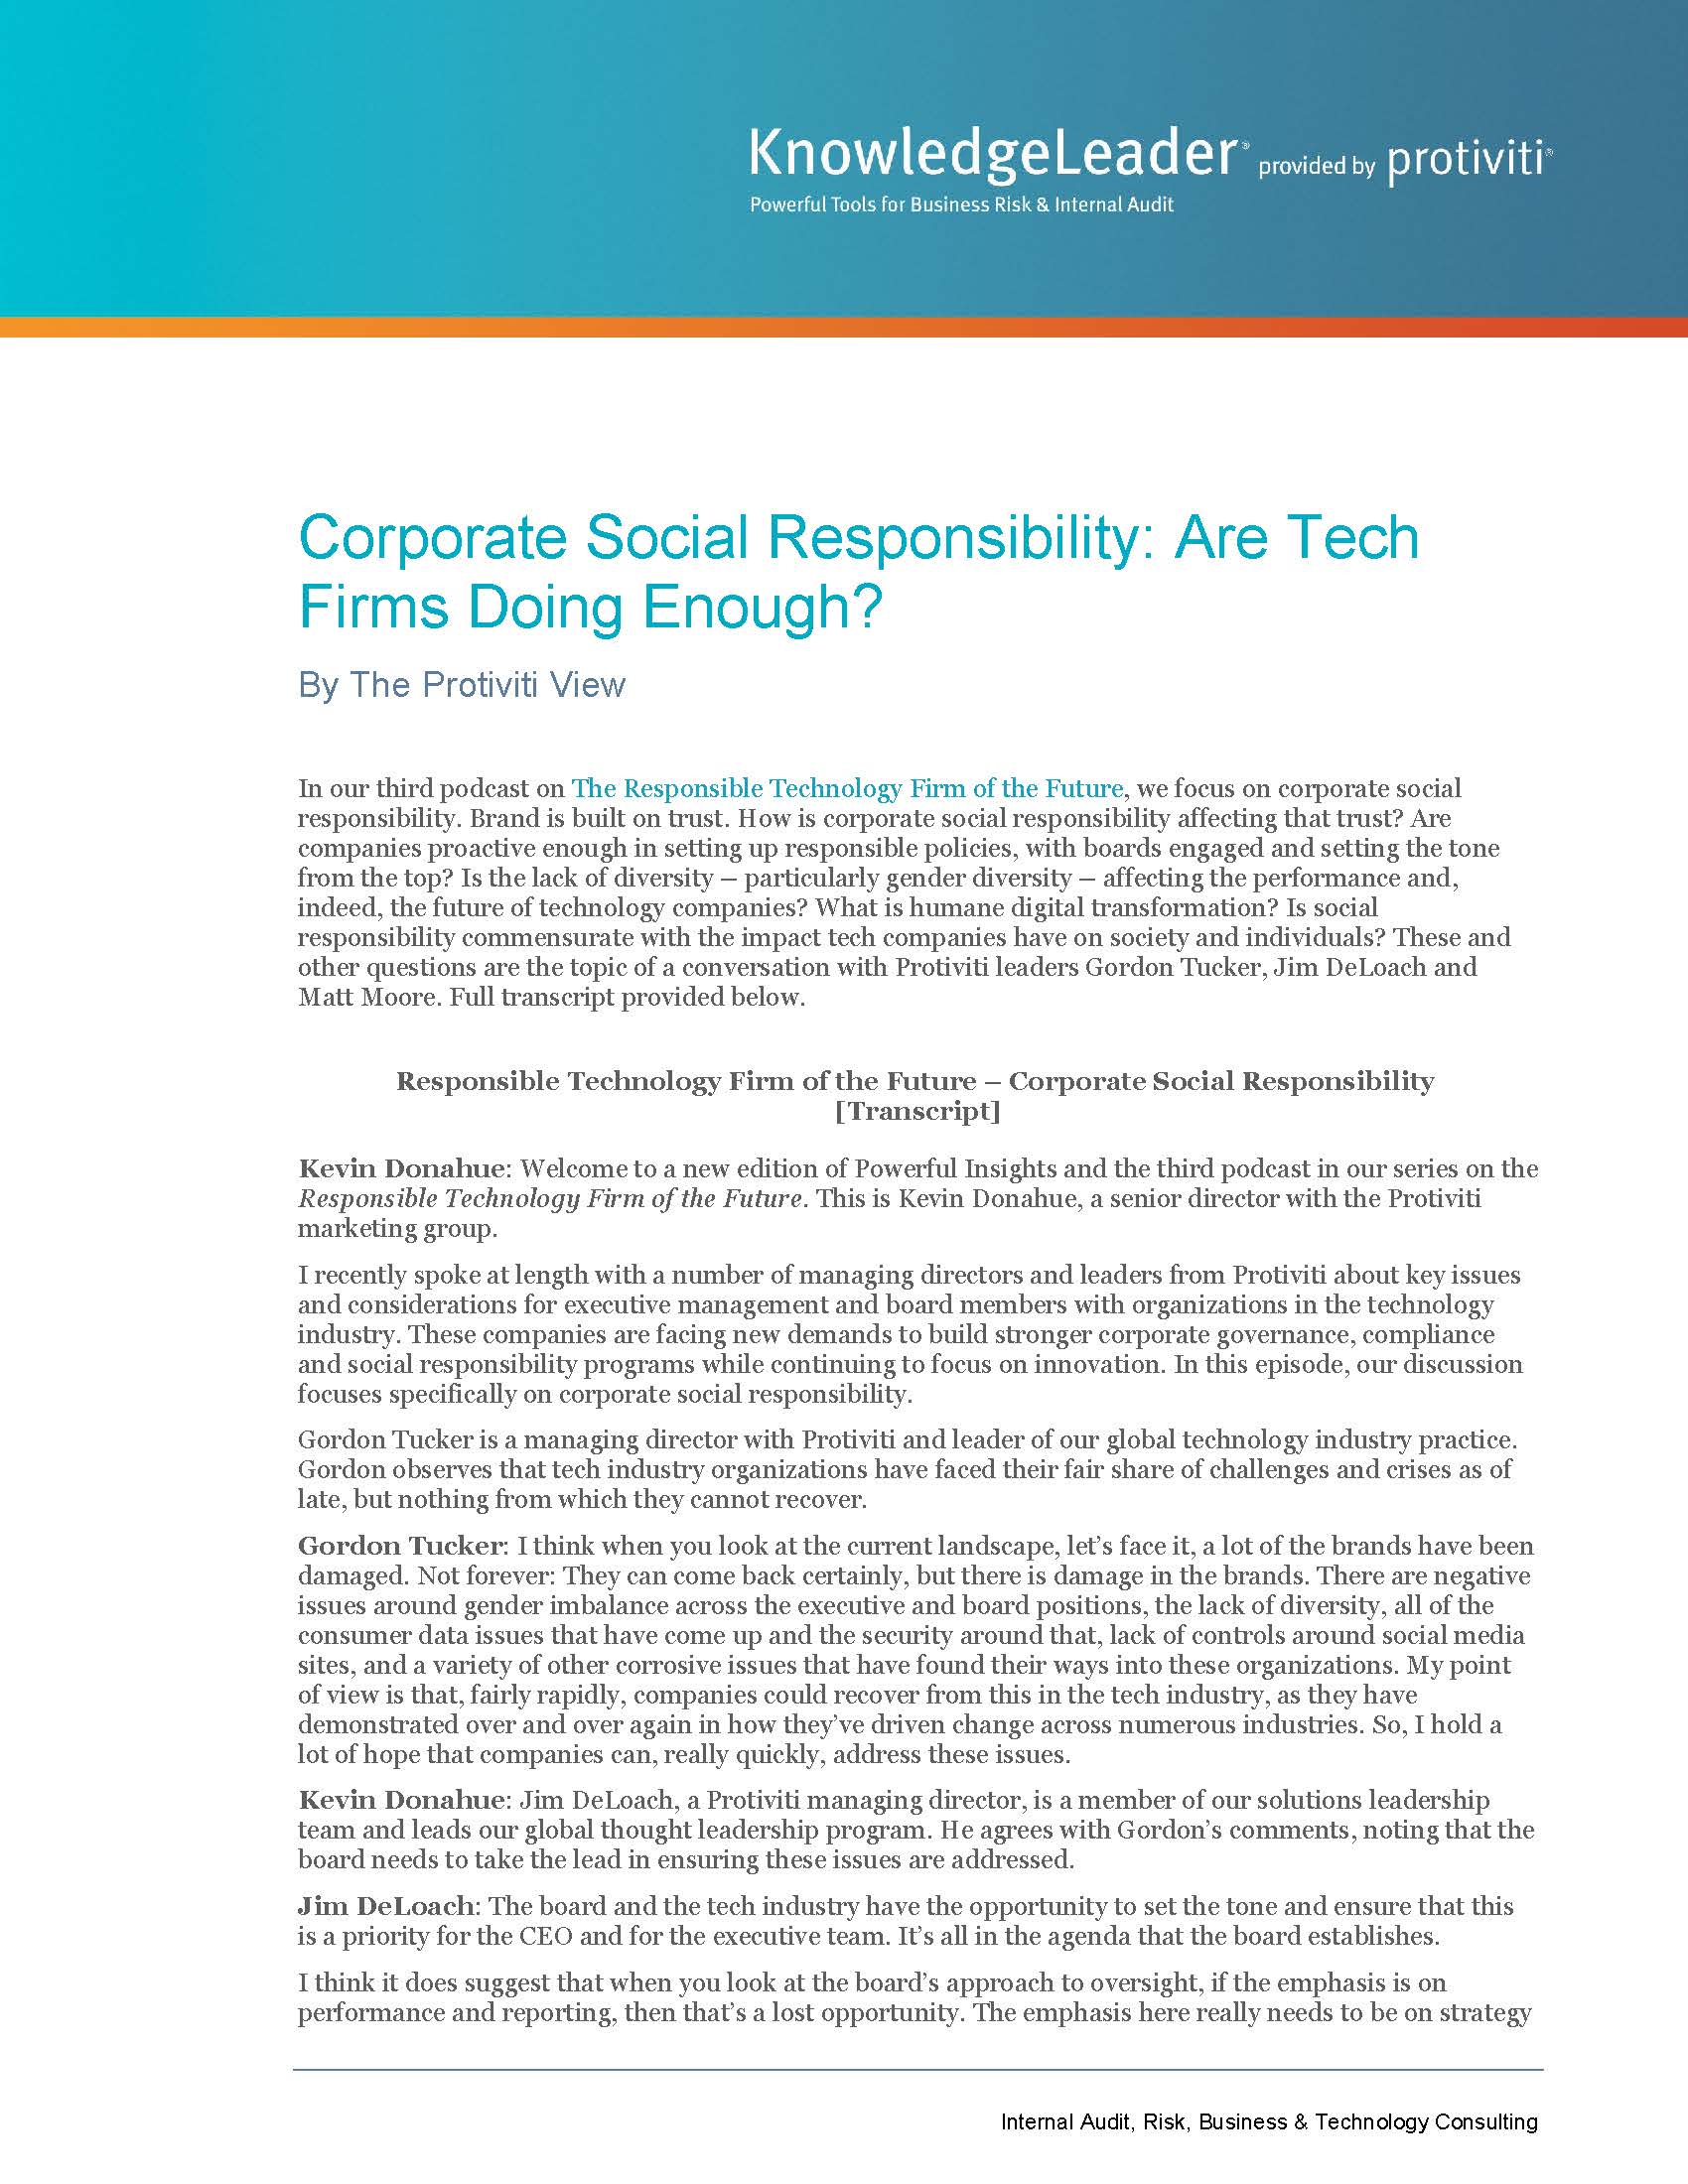 Screenshot of the first page of Corporate Social Responsibility: Are Tech Firms Doing Enough?